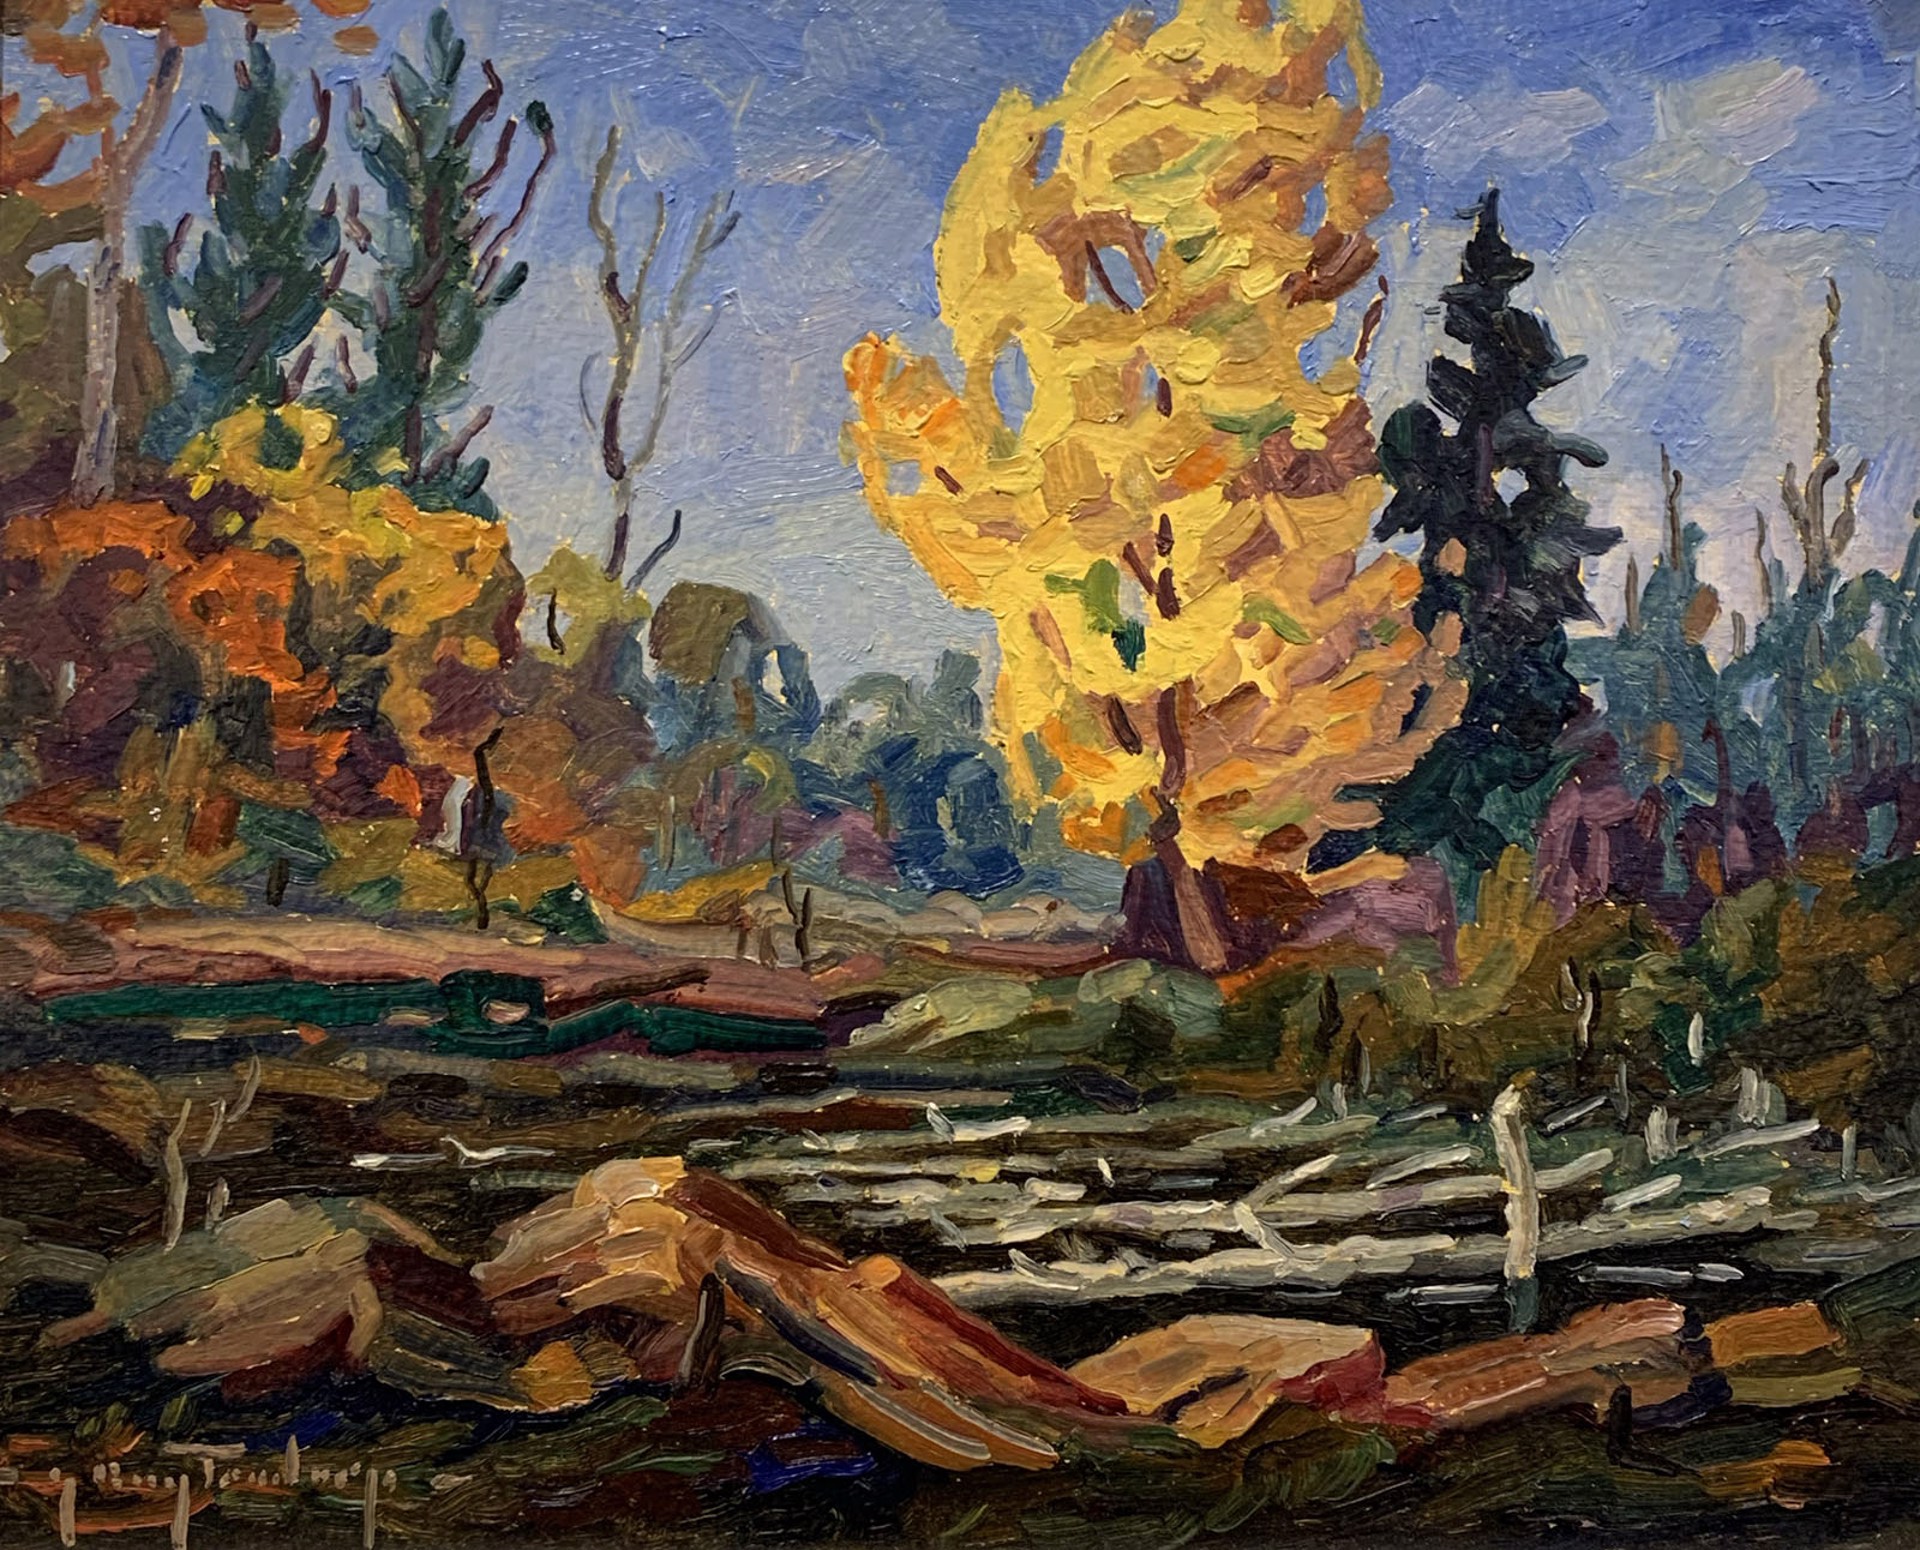 Northern Landscape by George Buytendorp (1923-2014)